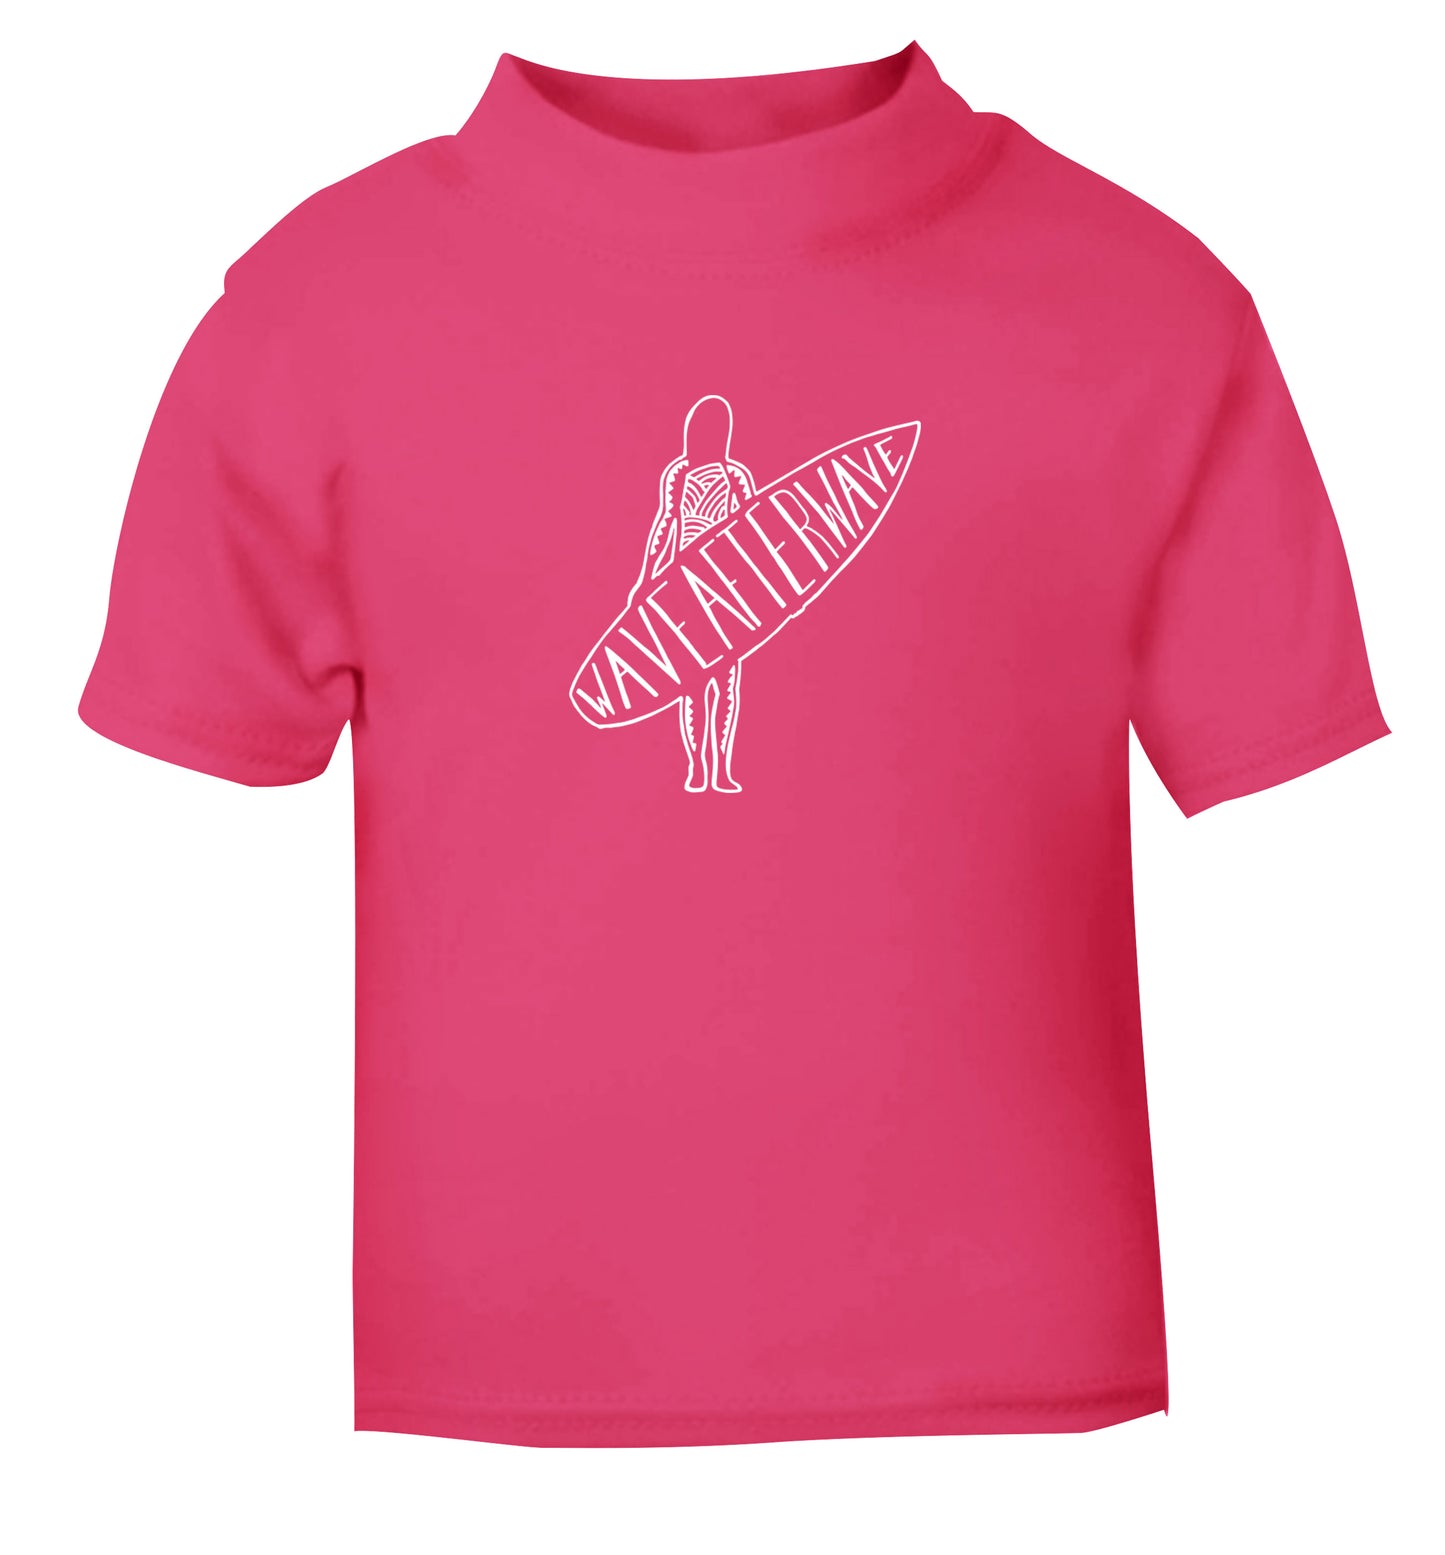 Wave after wave pink Baby Toddler Tshirt 2 Years